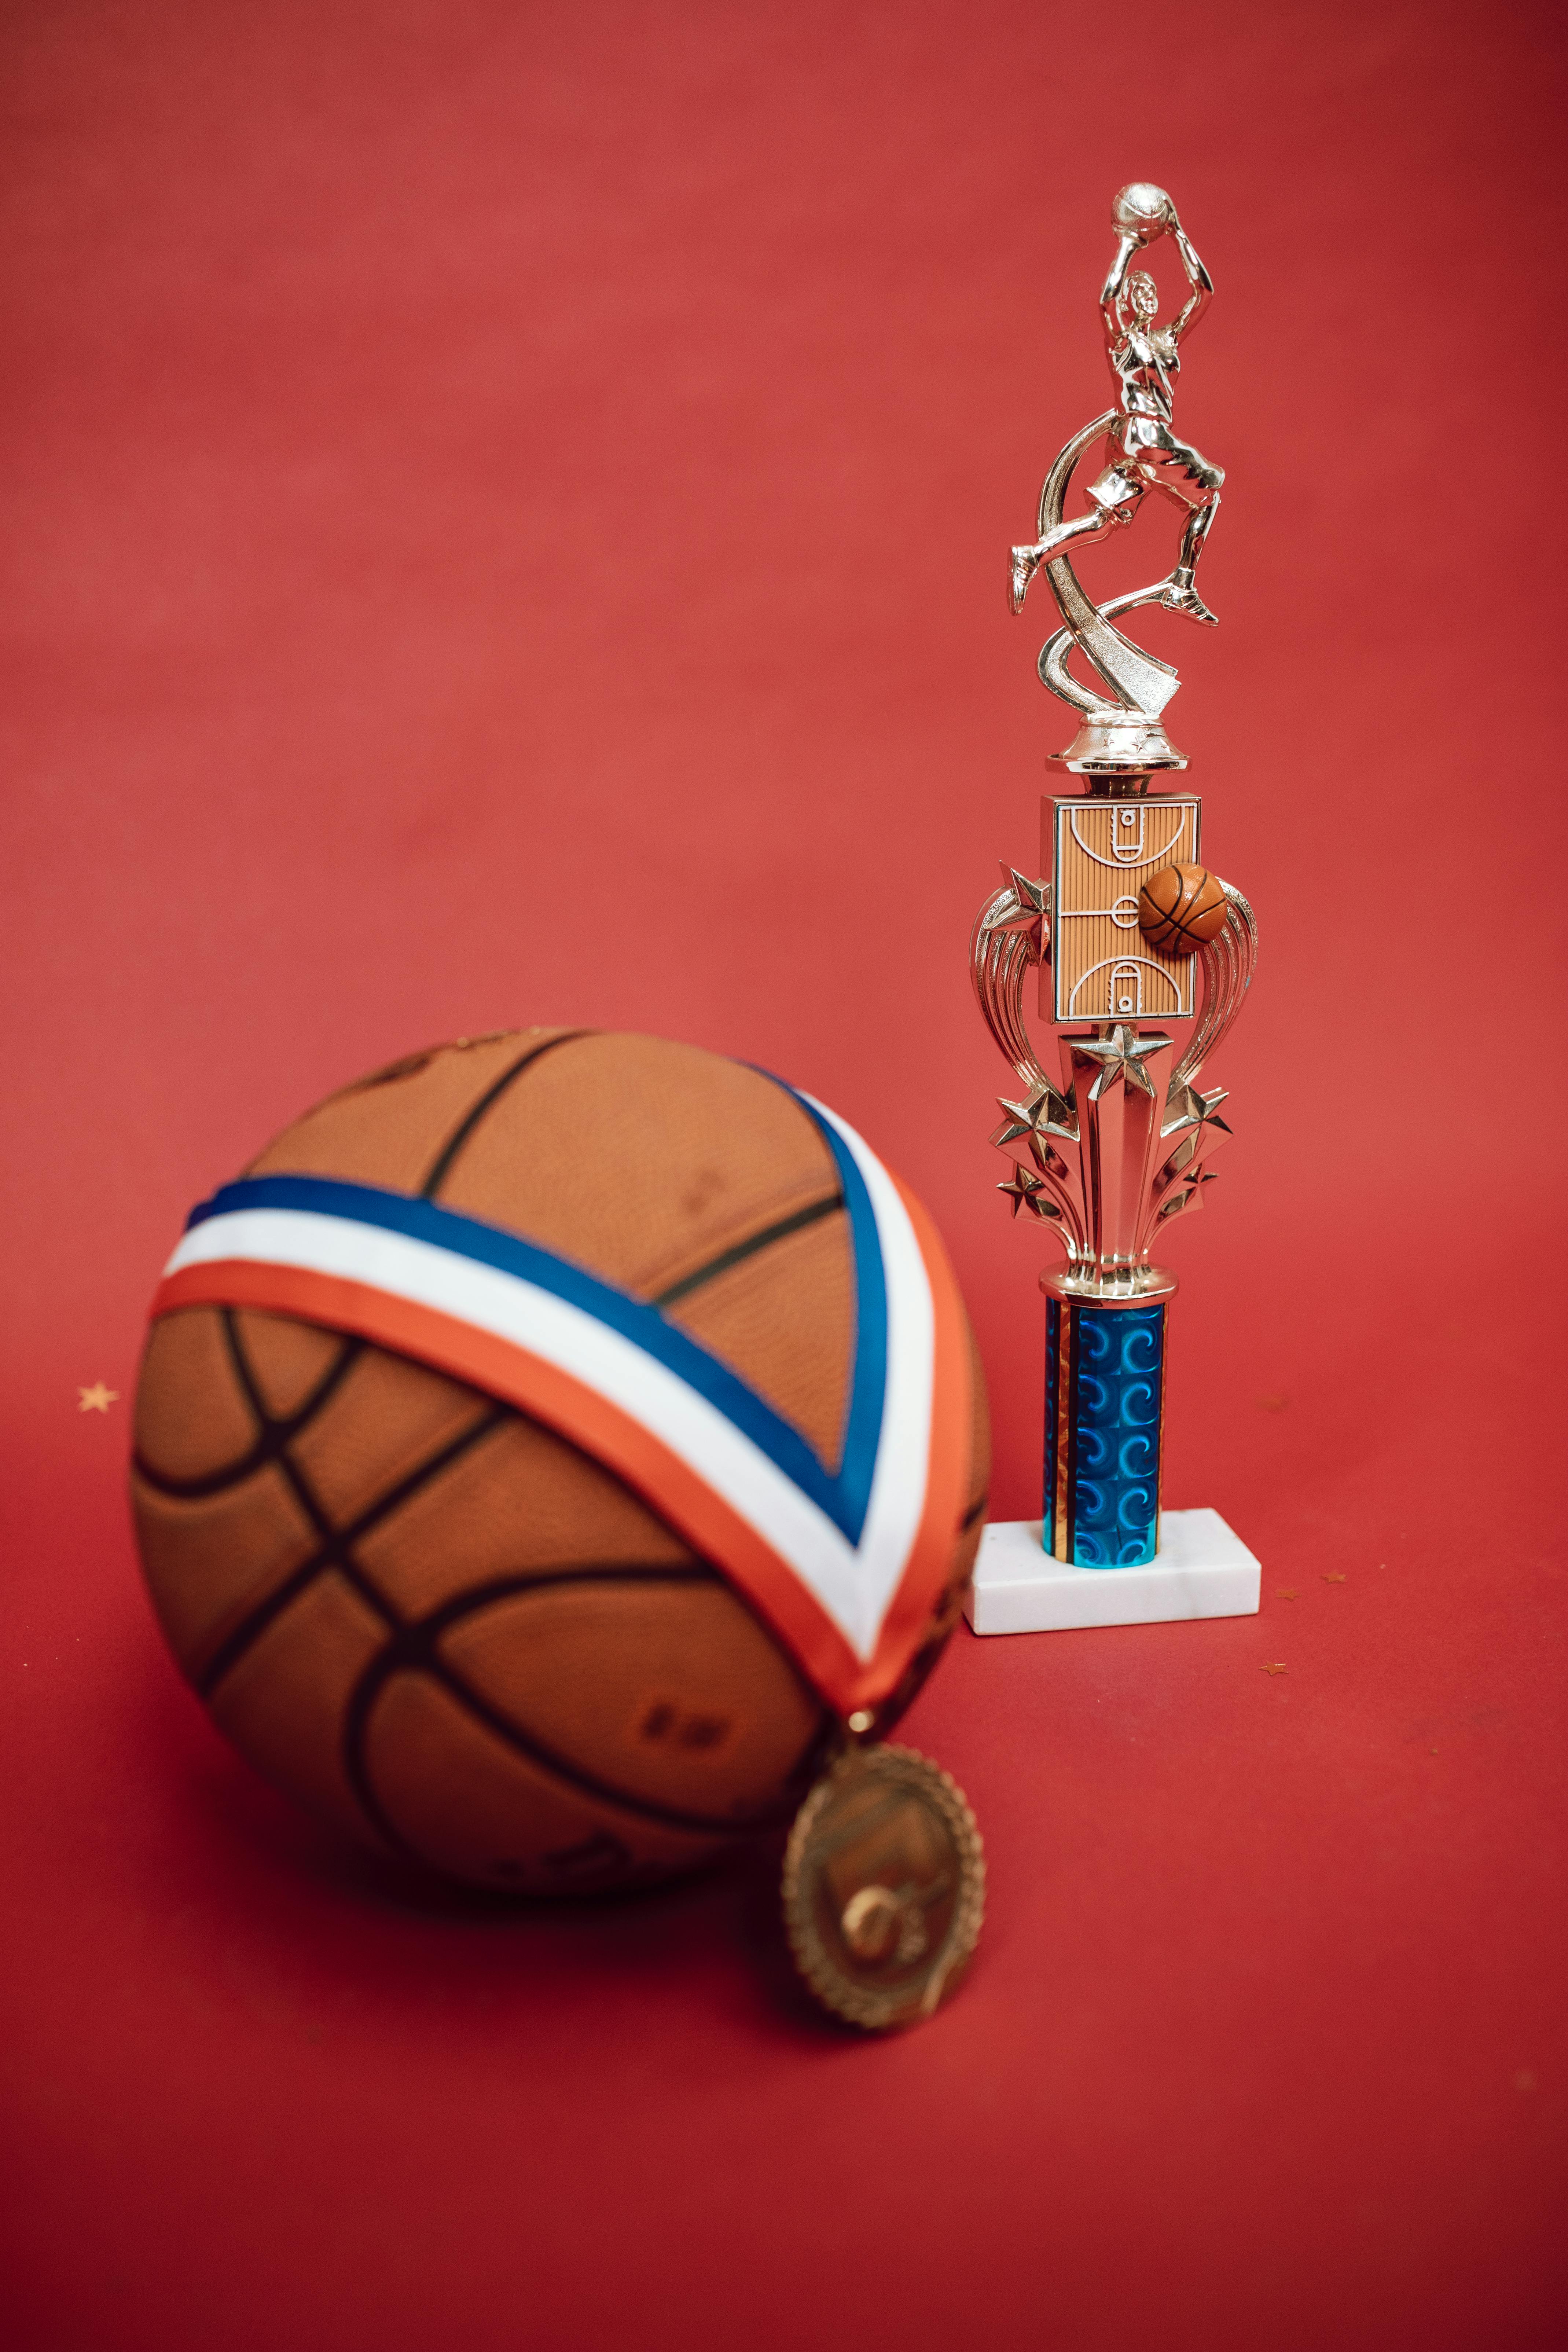 a medal on a ball and a basketball trophy